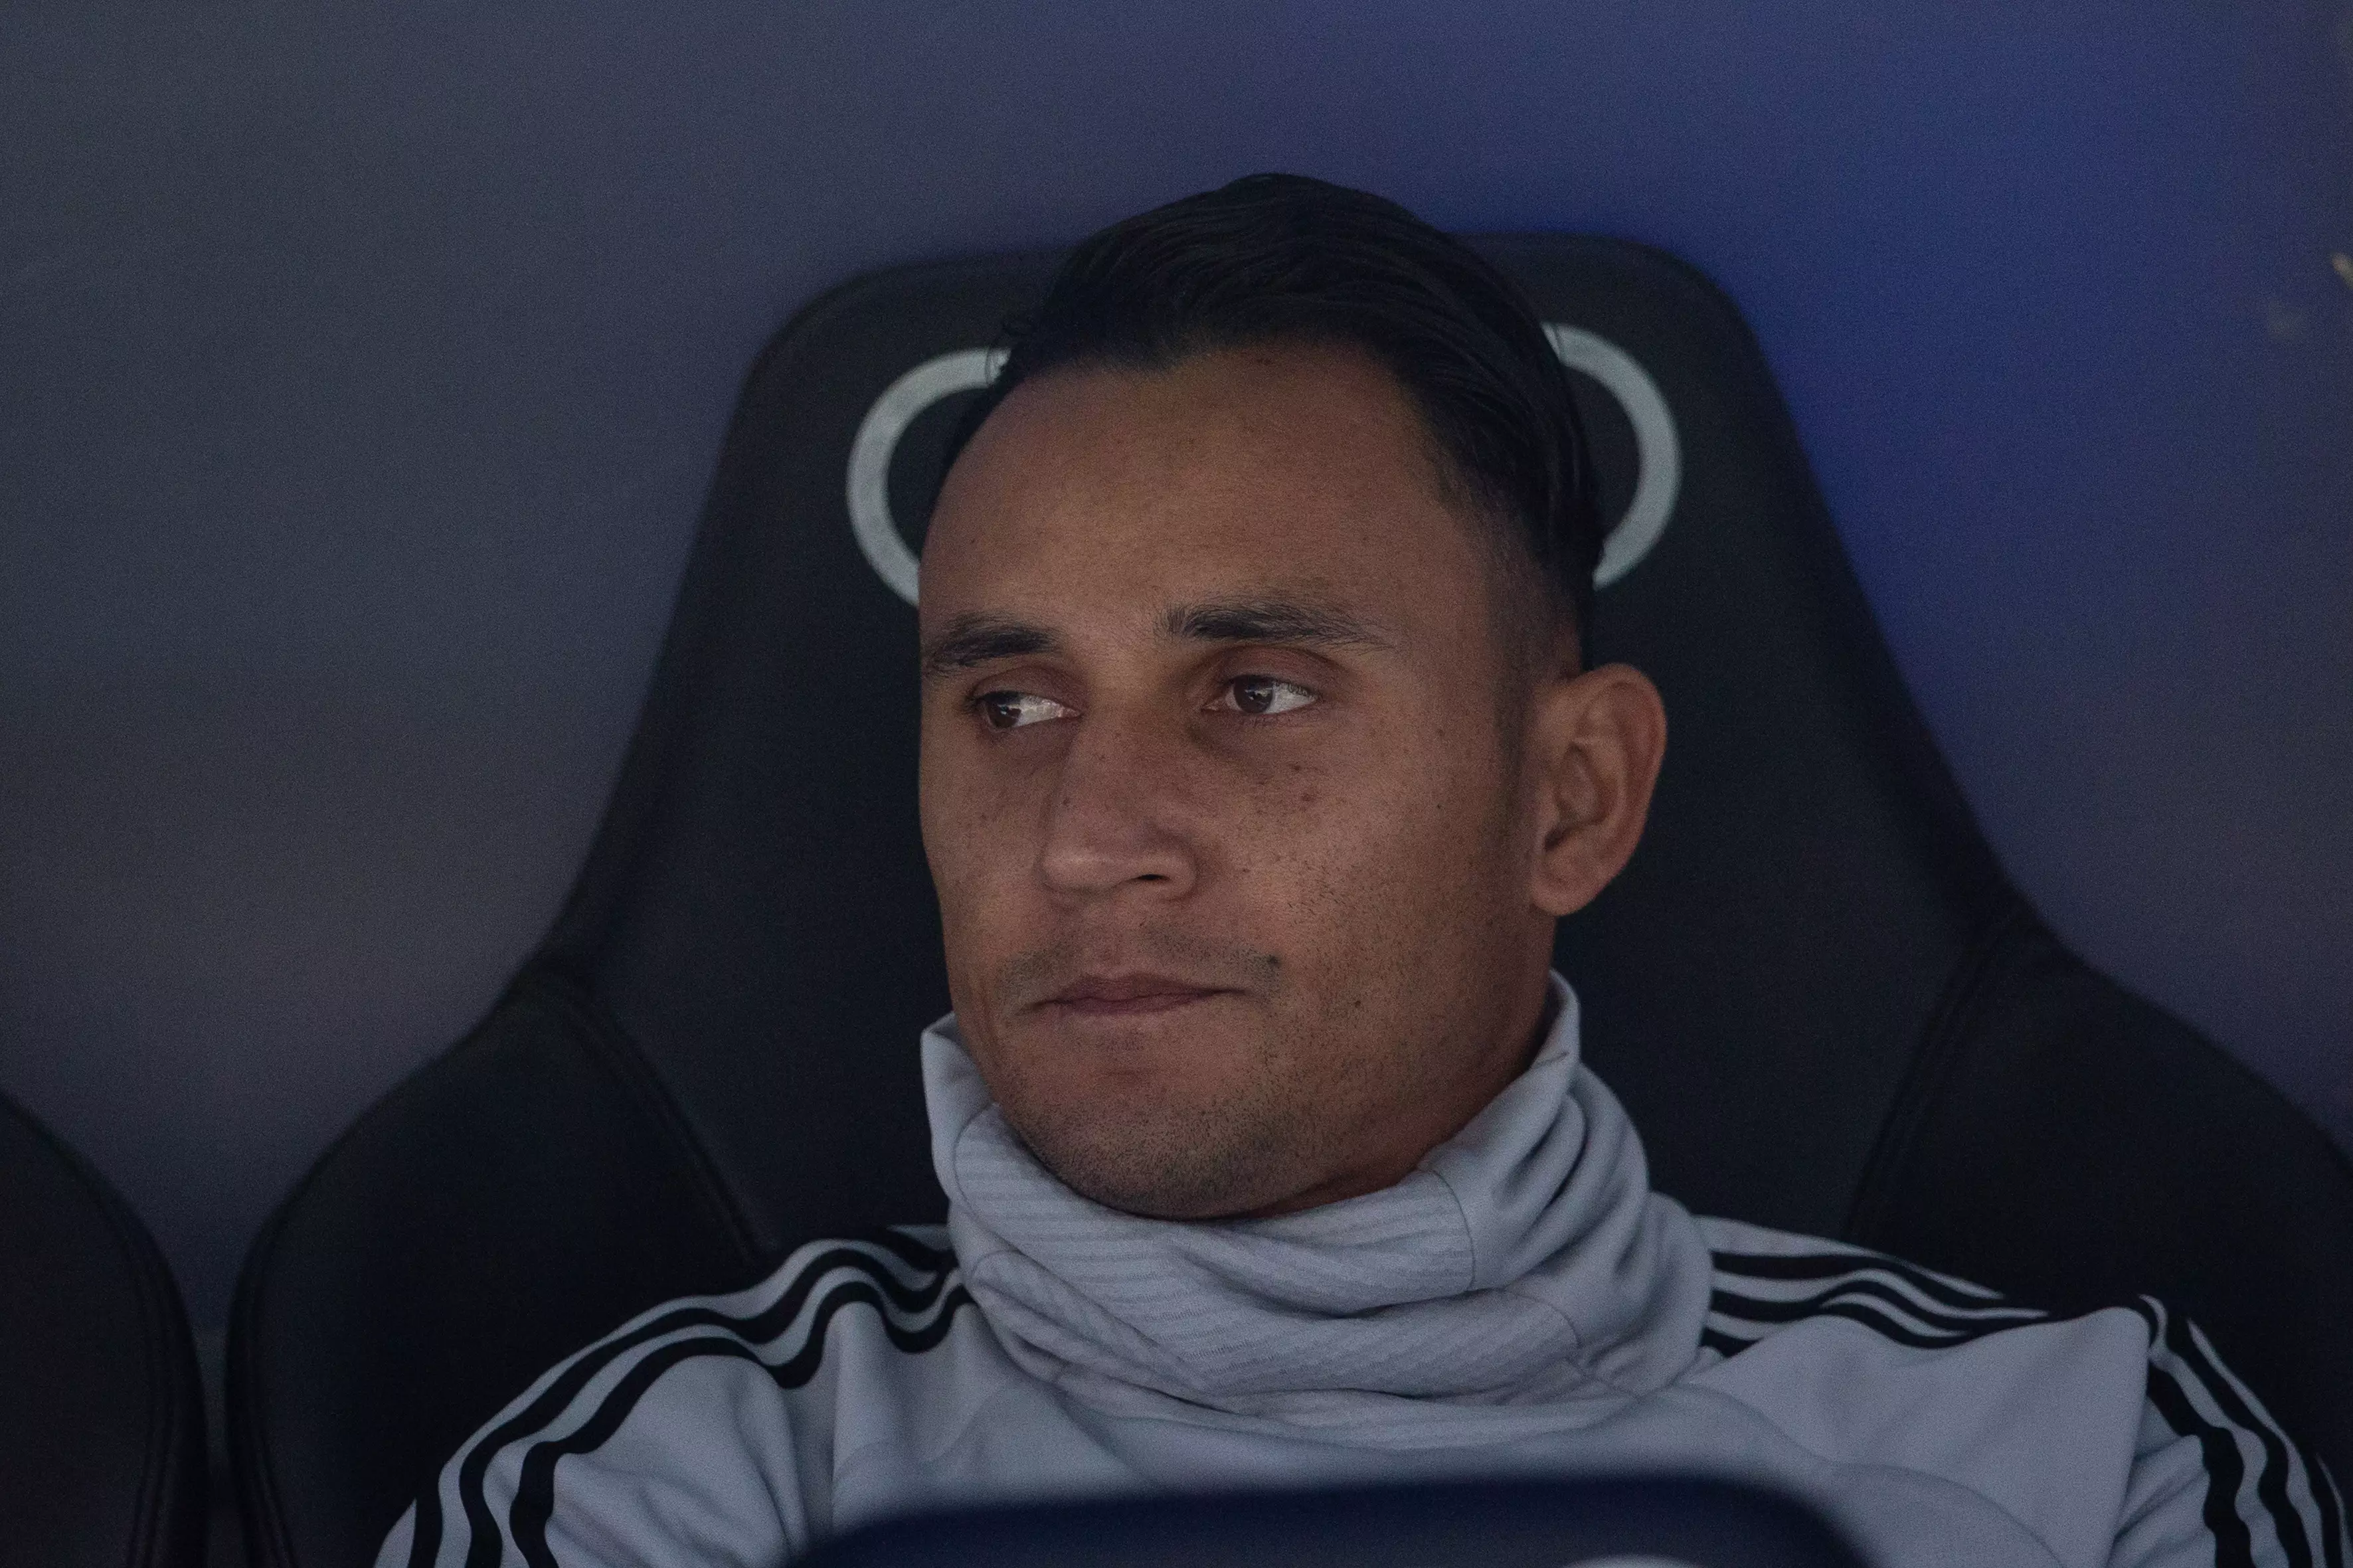 Navas has spent a lot of time on the bench this season. Image: PA Images